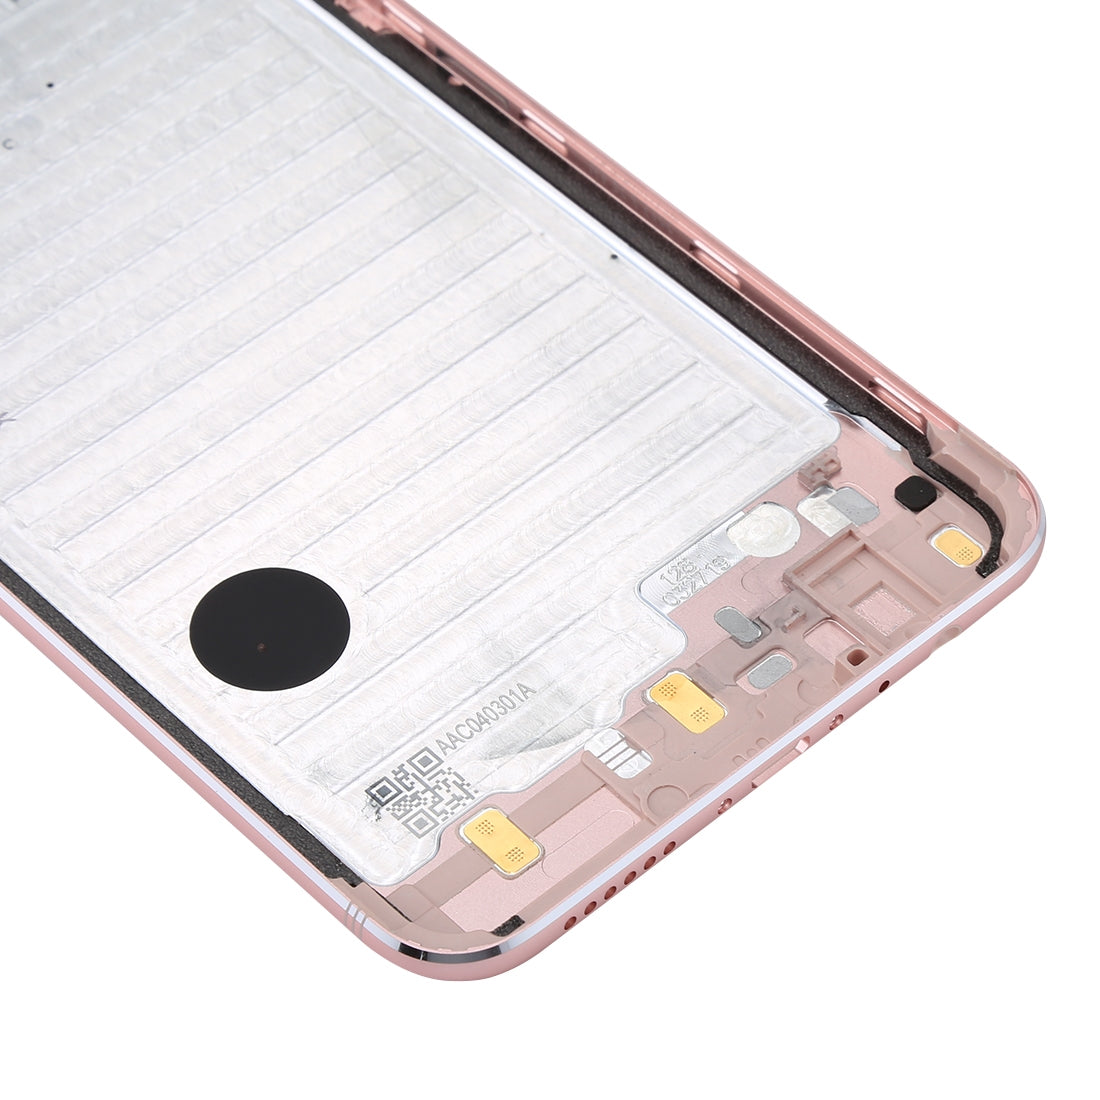 Battery Cover Back Cover Oppo R9s Plus / F3 Plus Rose Gold